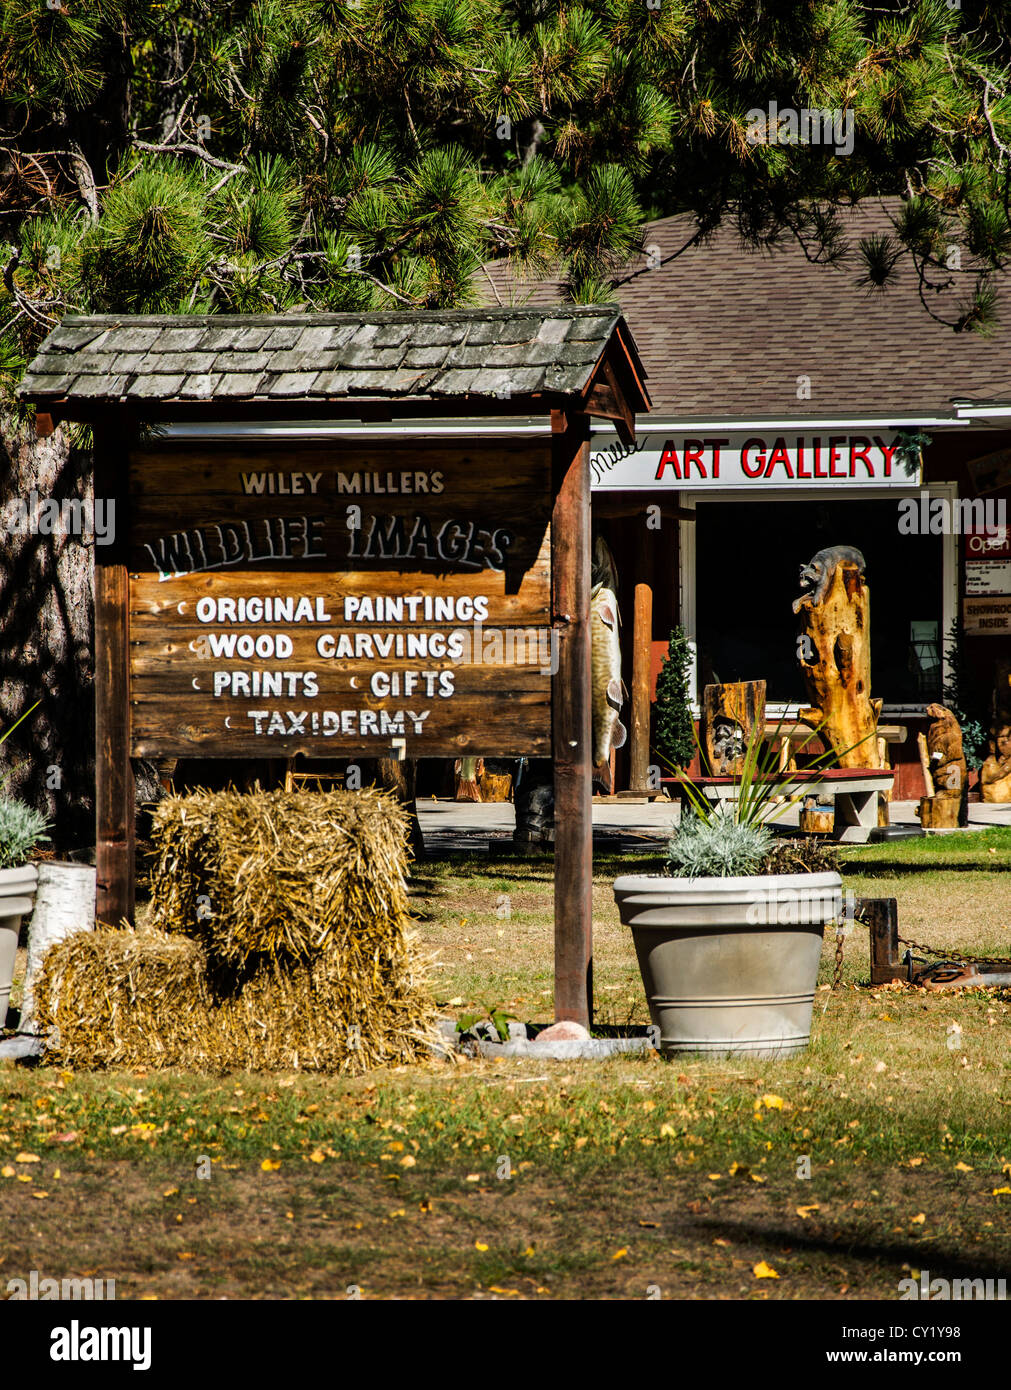 Wiley Miller's Art Gallery in Boulder Junction, Wisconsin features Miller's paintings, chainsaw sculptures and wood carvings. Stock Photo